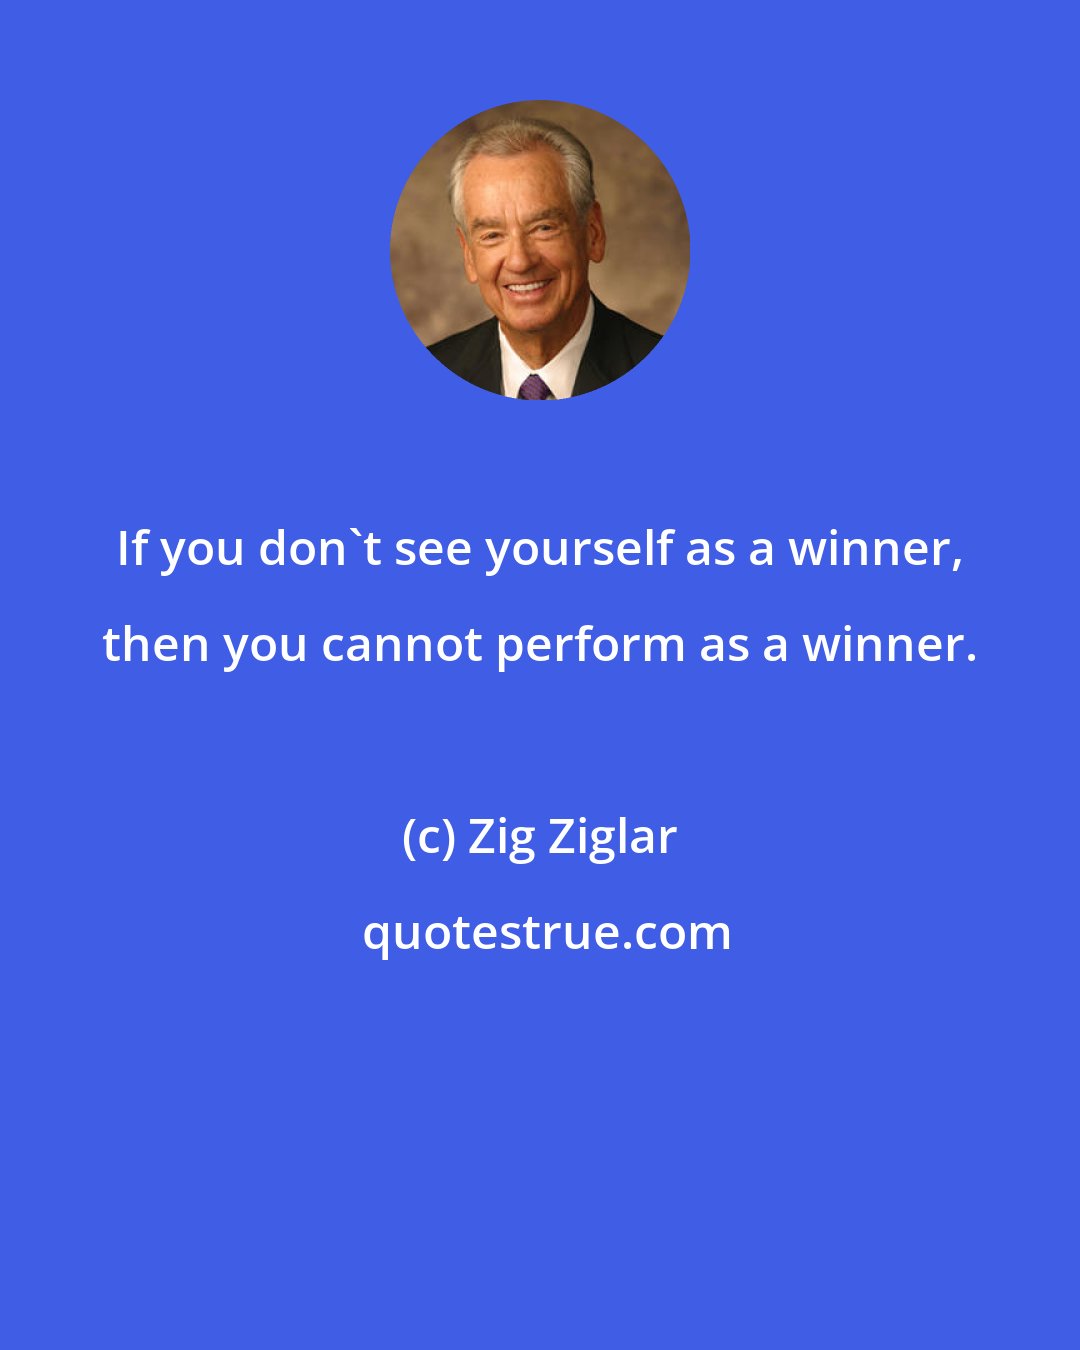 Zig Ziglar: If you don't see yourself as a winner, then you cannot perform as a winner.